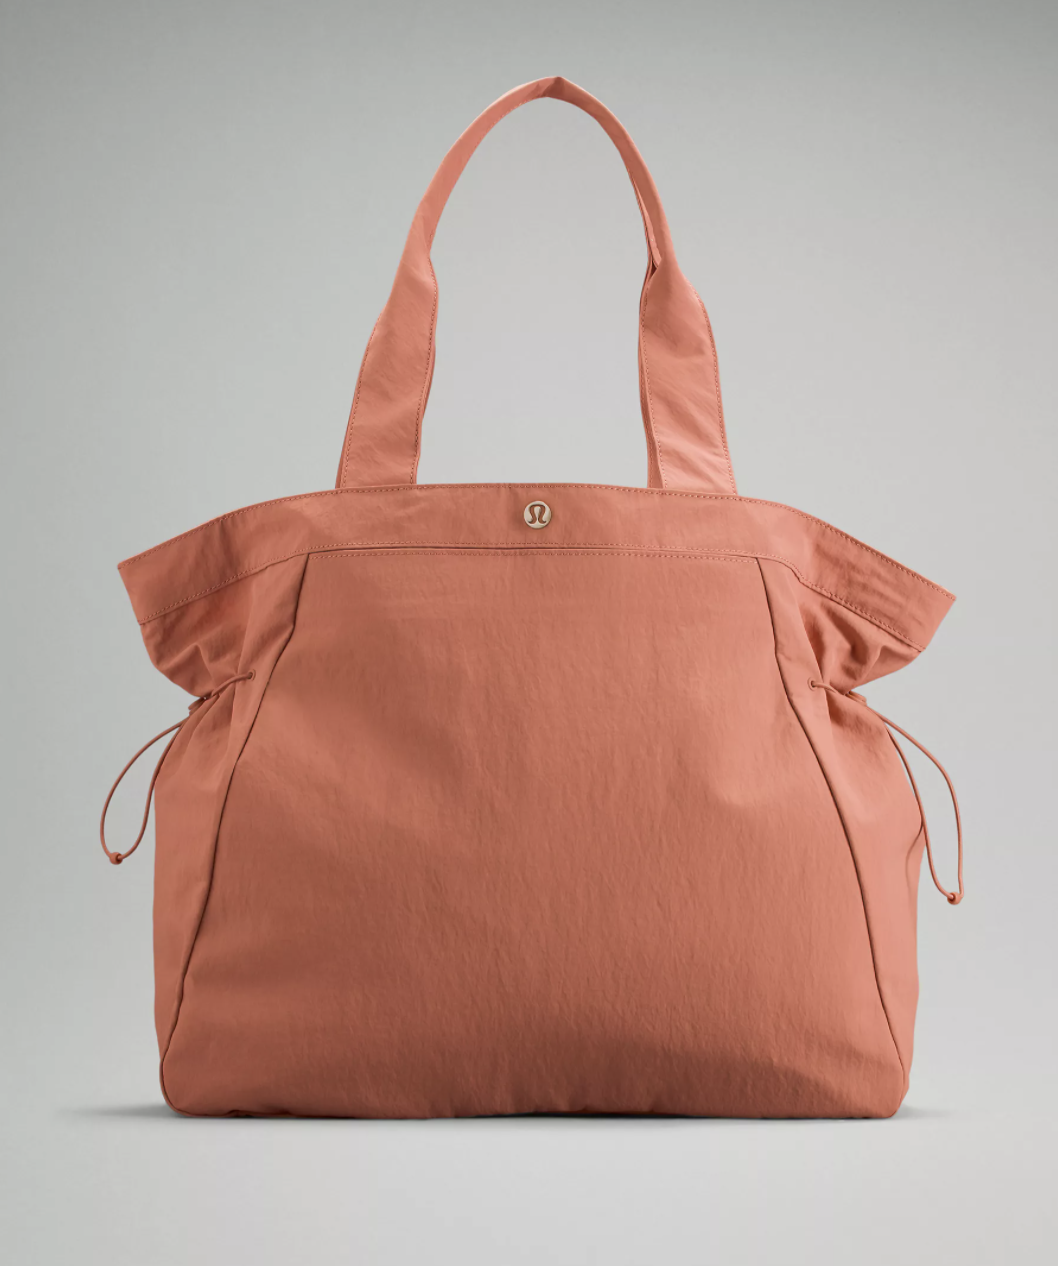 a large tote bag with cinchable sides